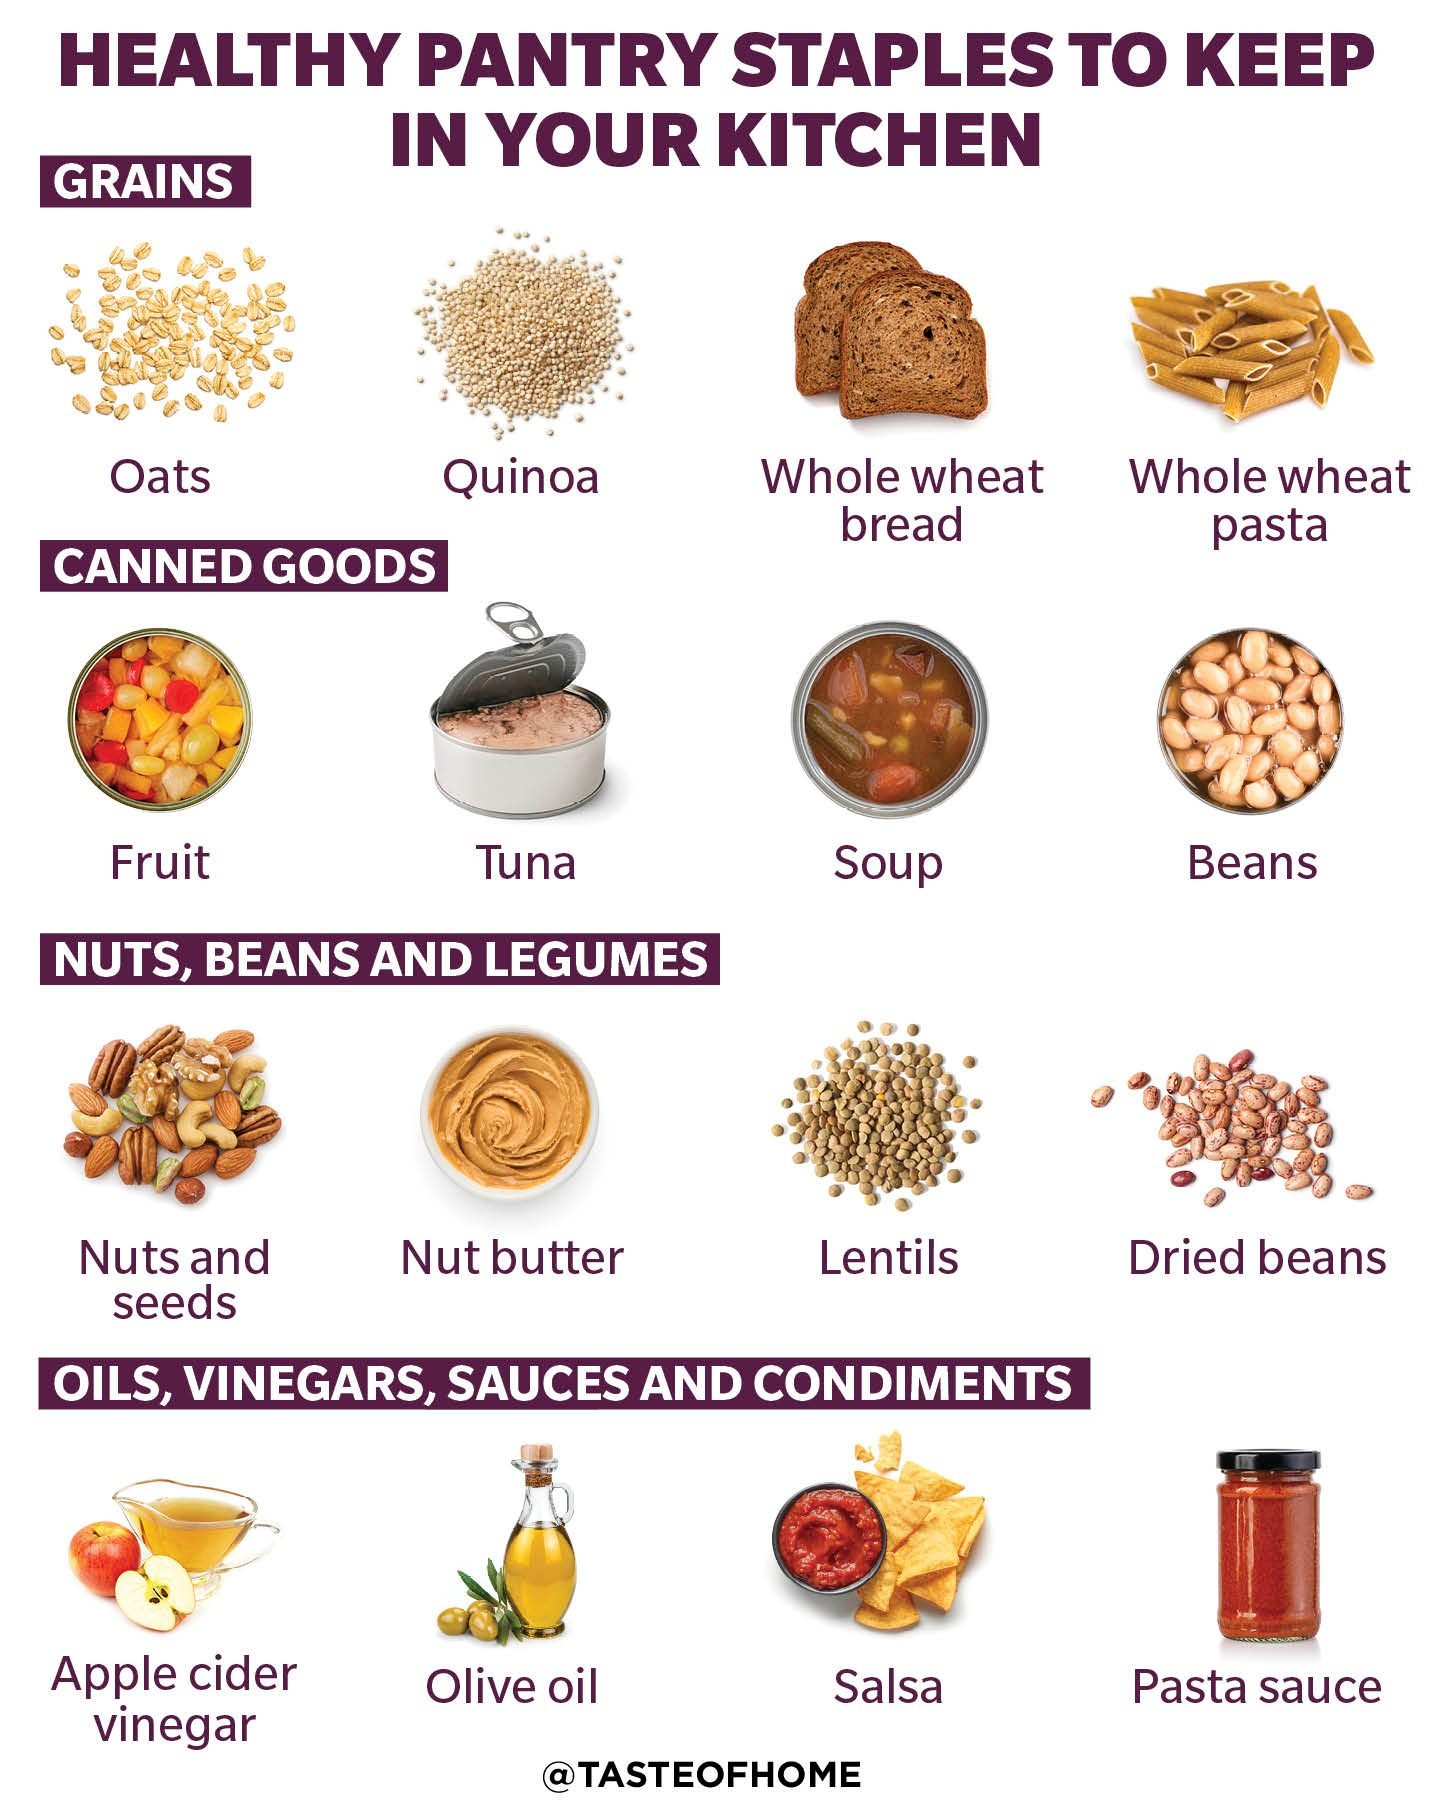 28 Healthy Pantry Staples to Keep in Your Kitchen